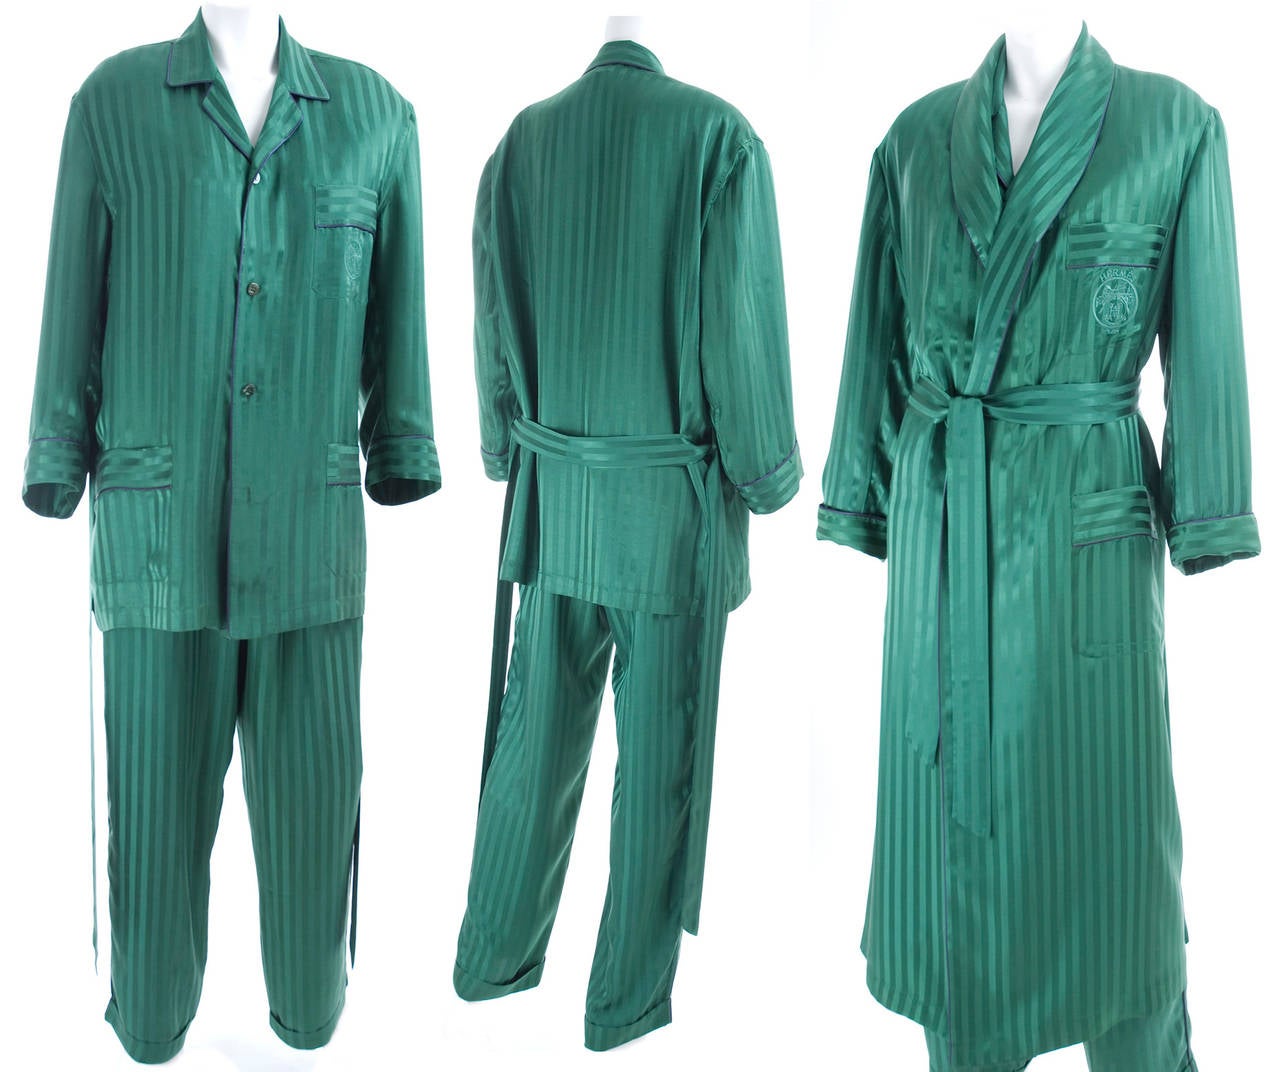 Vintage Hermes Men's Pajama and Robe.
Green with navy blue piping/trim around the edges at collar, cuffs, and side trim.
Robe silk lining green with dots.
Has been gentle used and is in very good condition.
Size M / 50